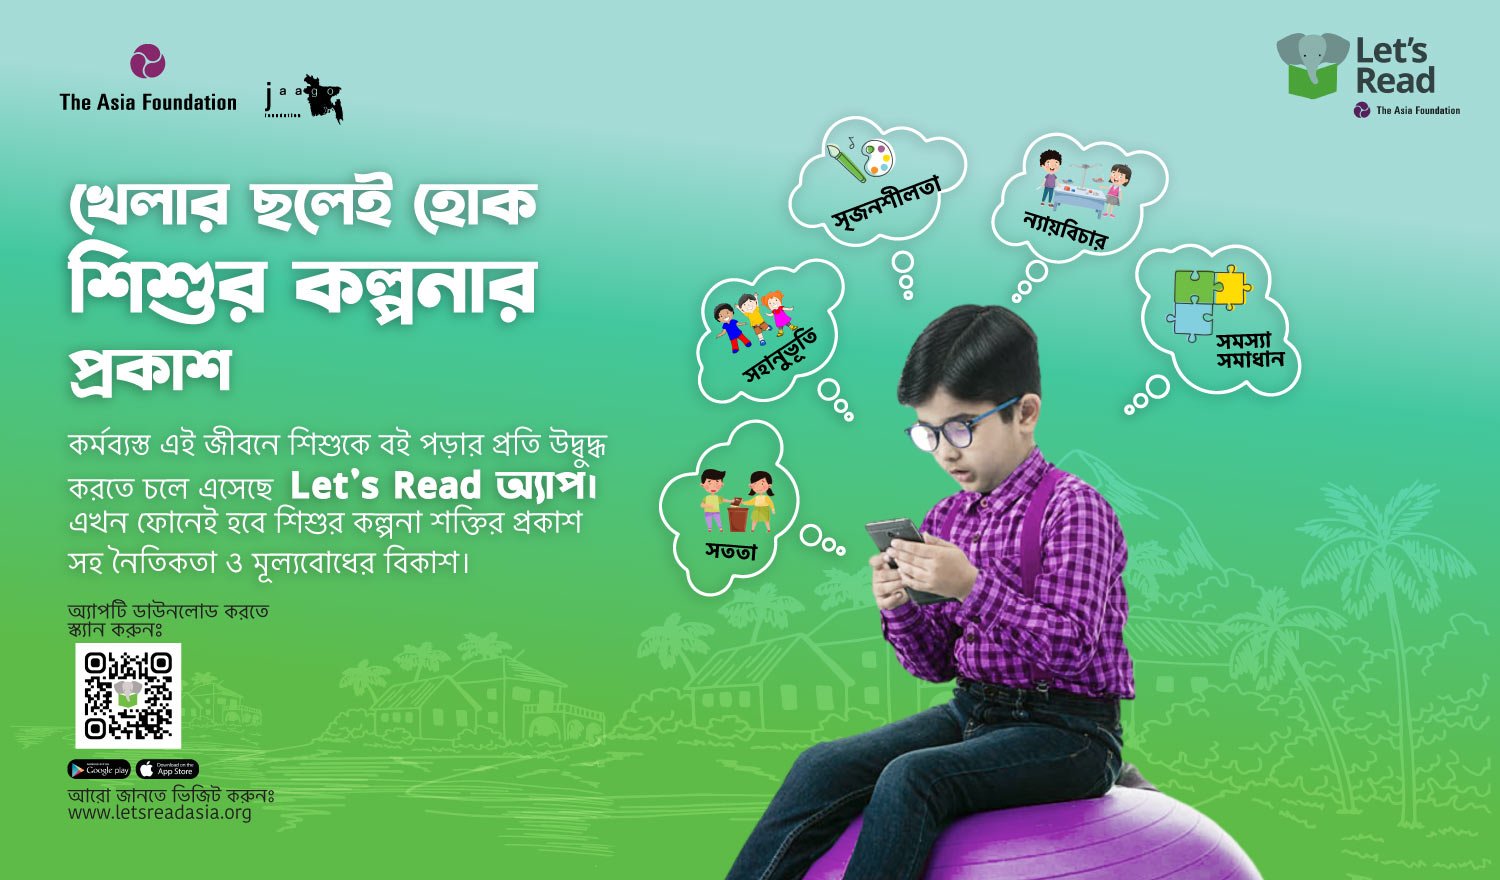 Encouraging Children to Read with Let’s Read app